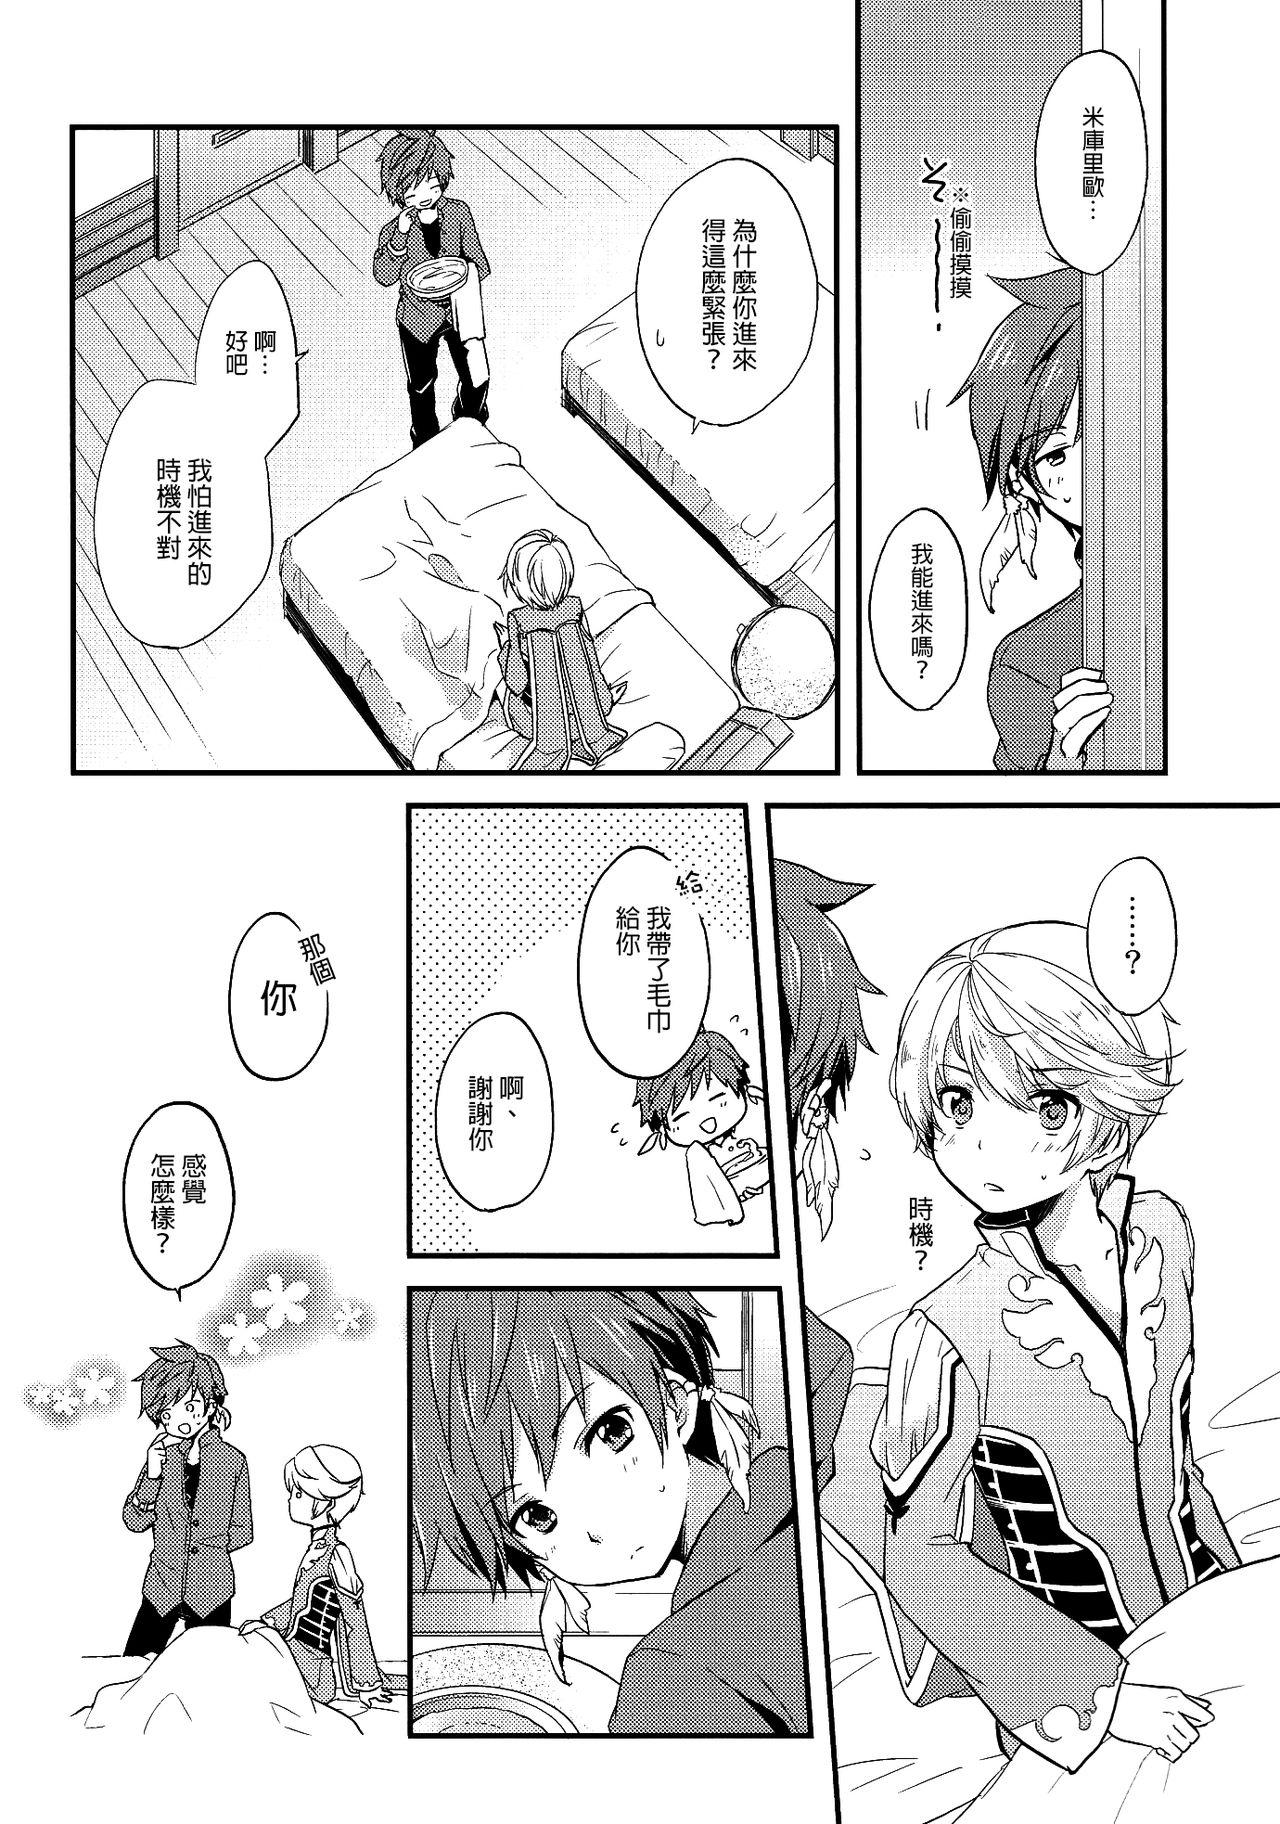 Shaking Datte Dare mo Oshiete Kurenai | That's because nobody taught me - Tales of zestiria Bed - Page 6